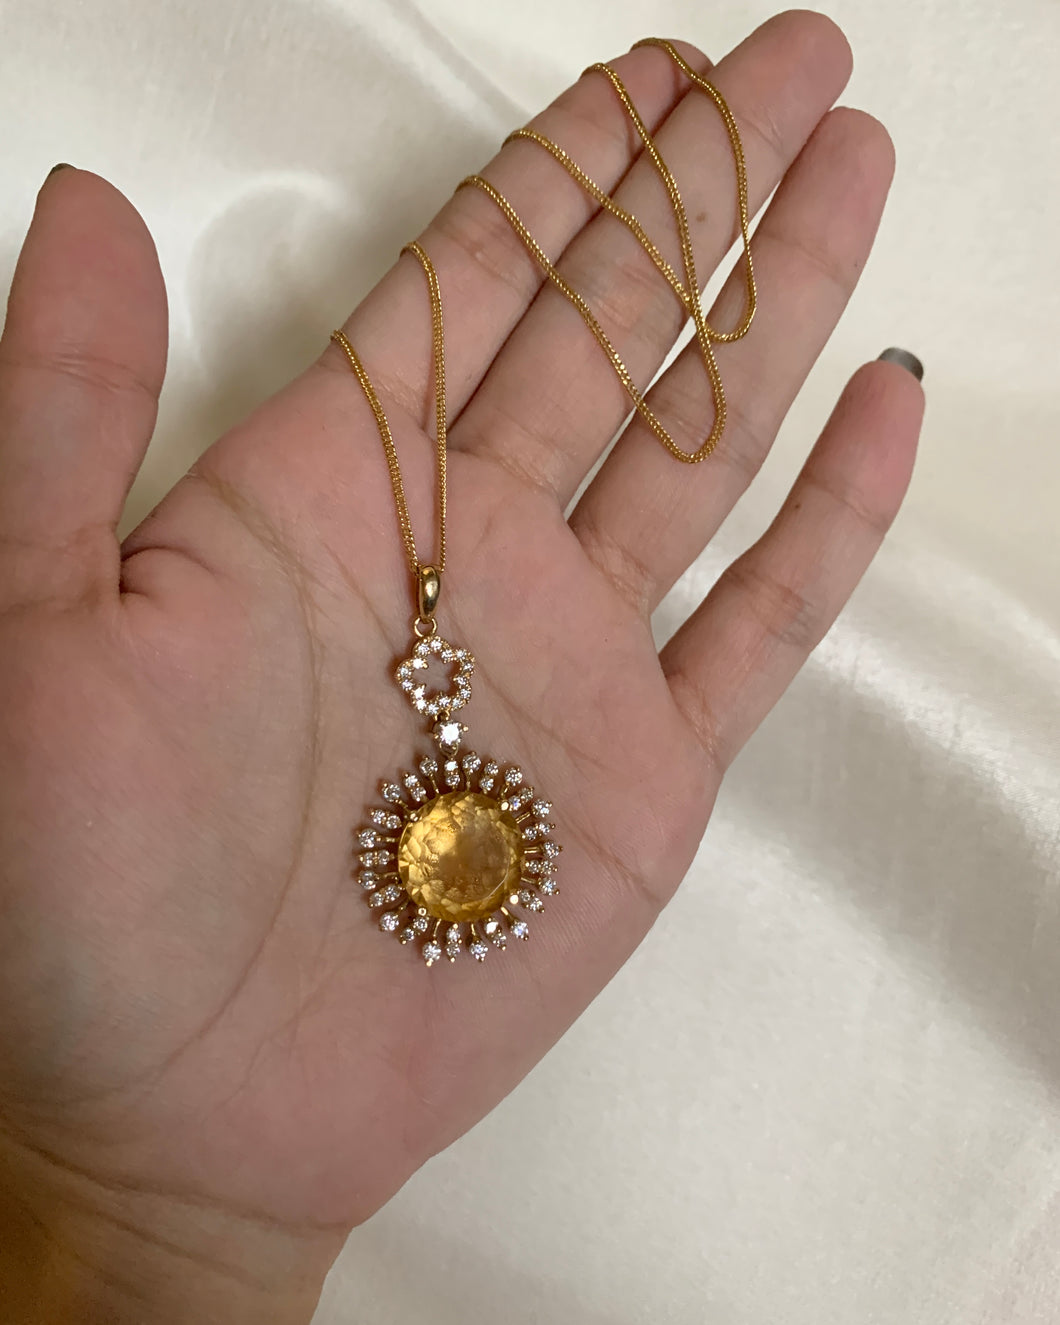 A round yellow citrine stone in bezzle moissanites and set in yellow gold. 